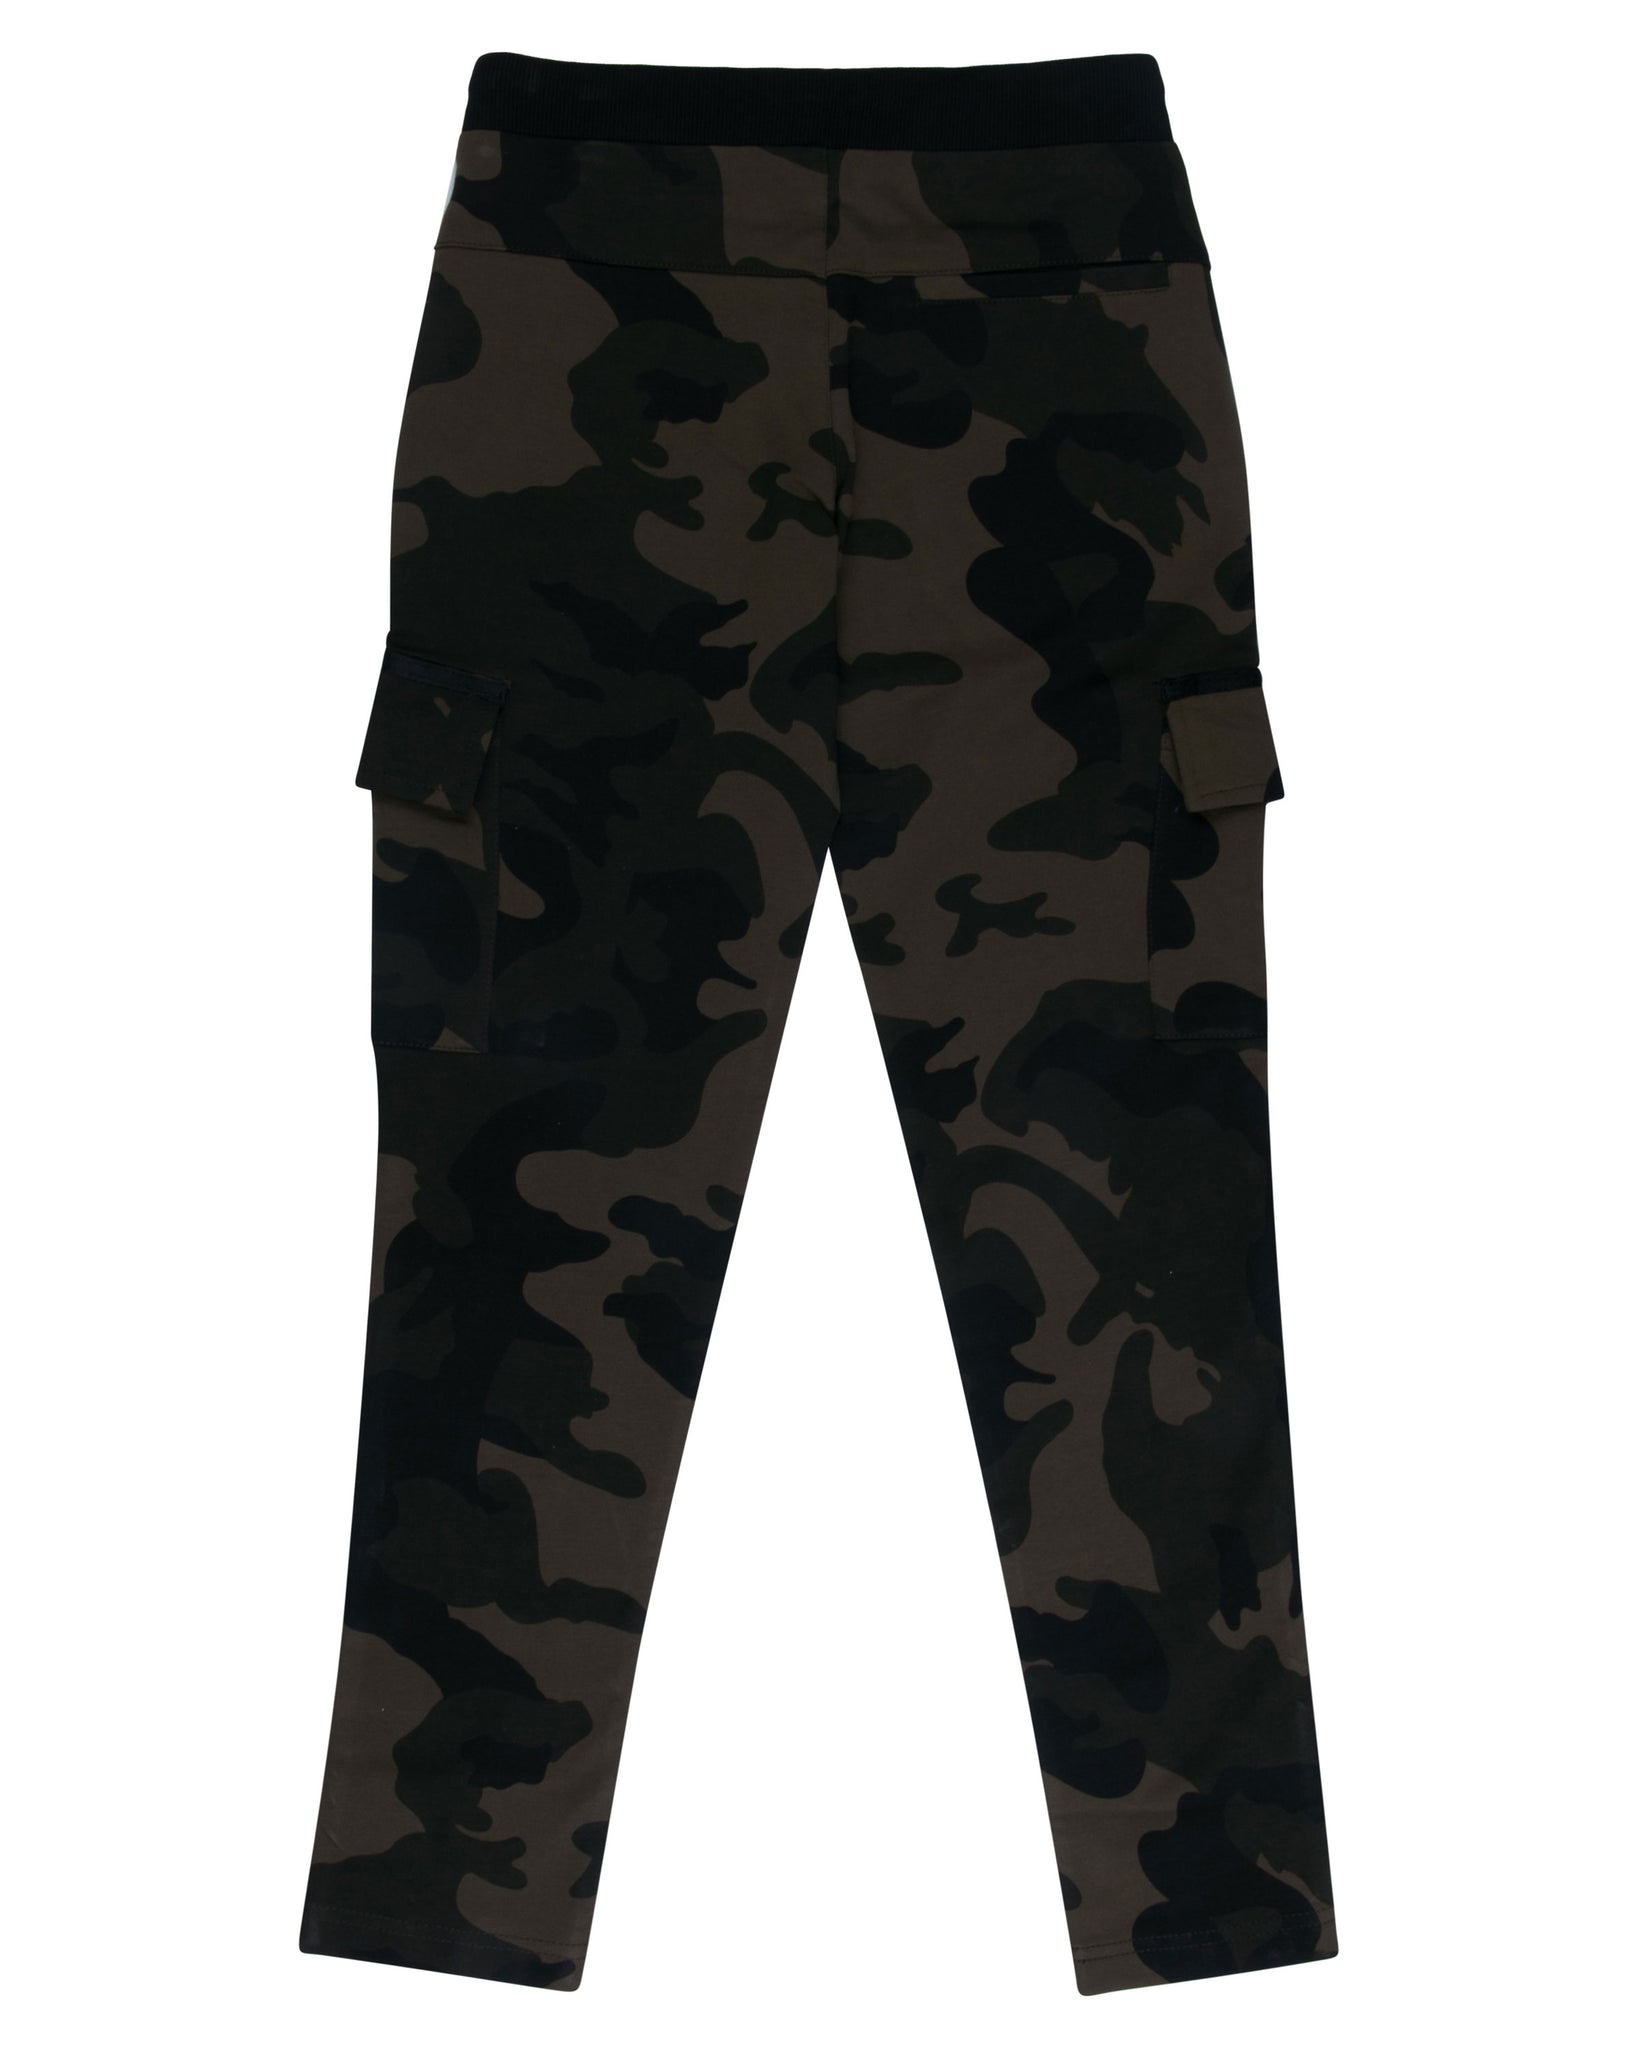 DISOLVE Army Track Jogger Pants Free Size(26 Till 30) Green Color :  Amazon.in: Clothing & Accessories